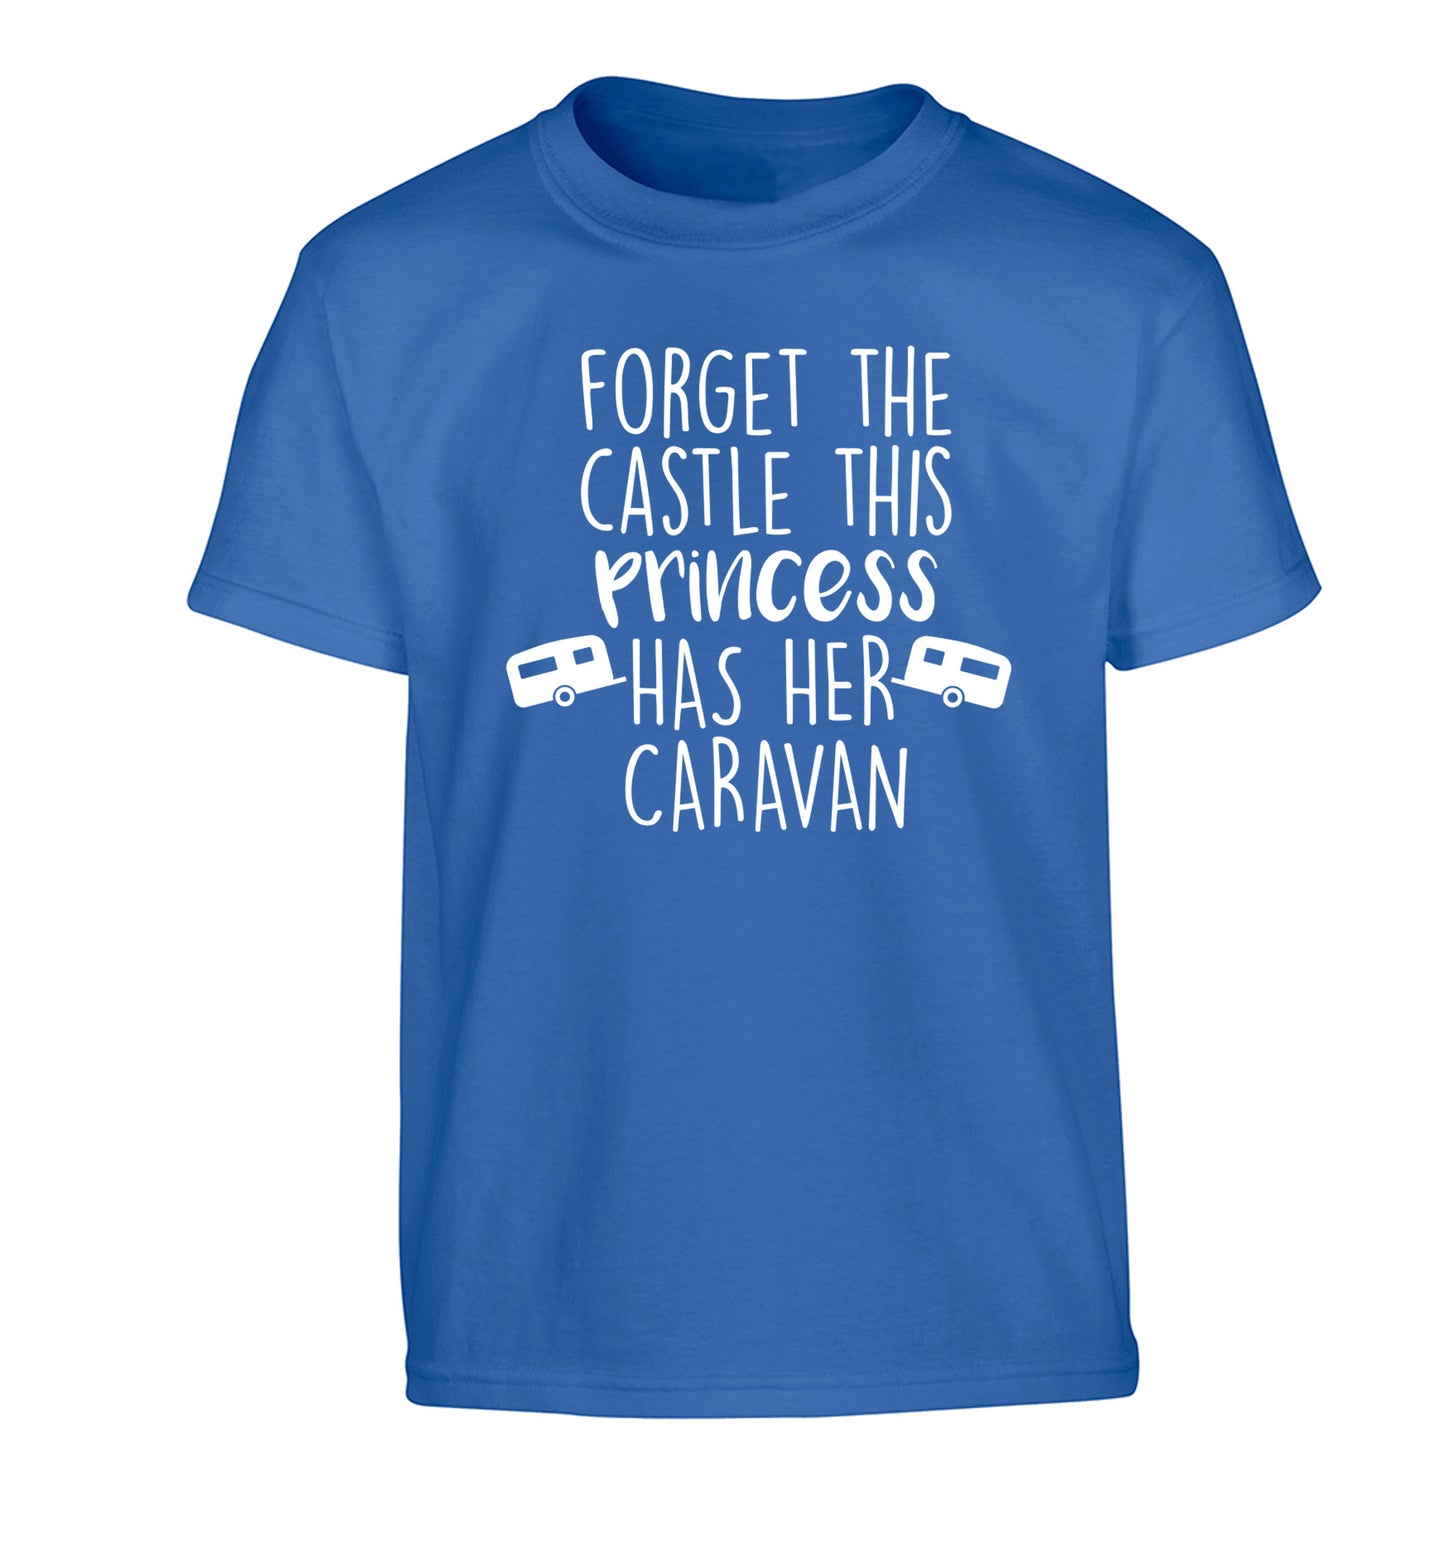 Forget the castle this princess lives at the caravan Children's blue Tshirt 12-14 Years